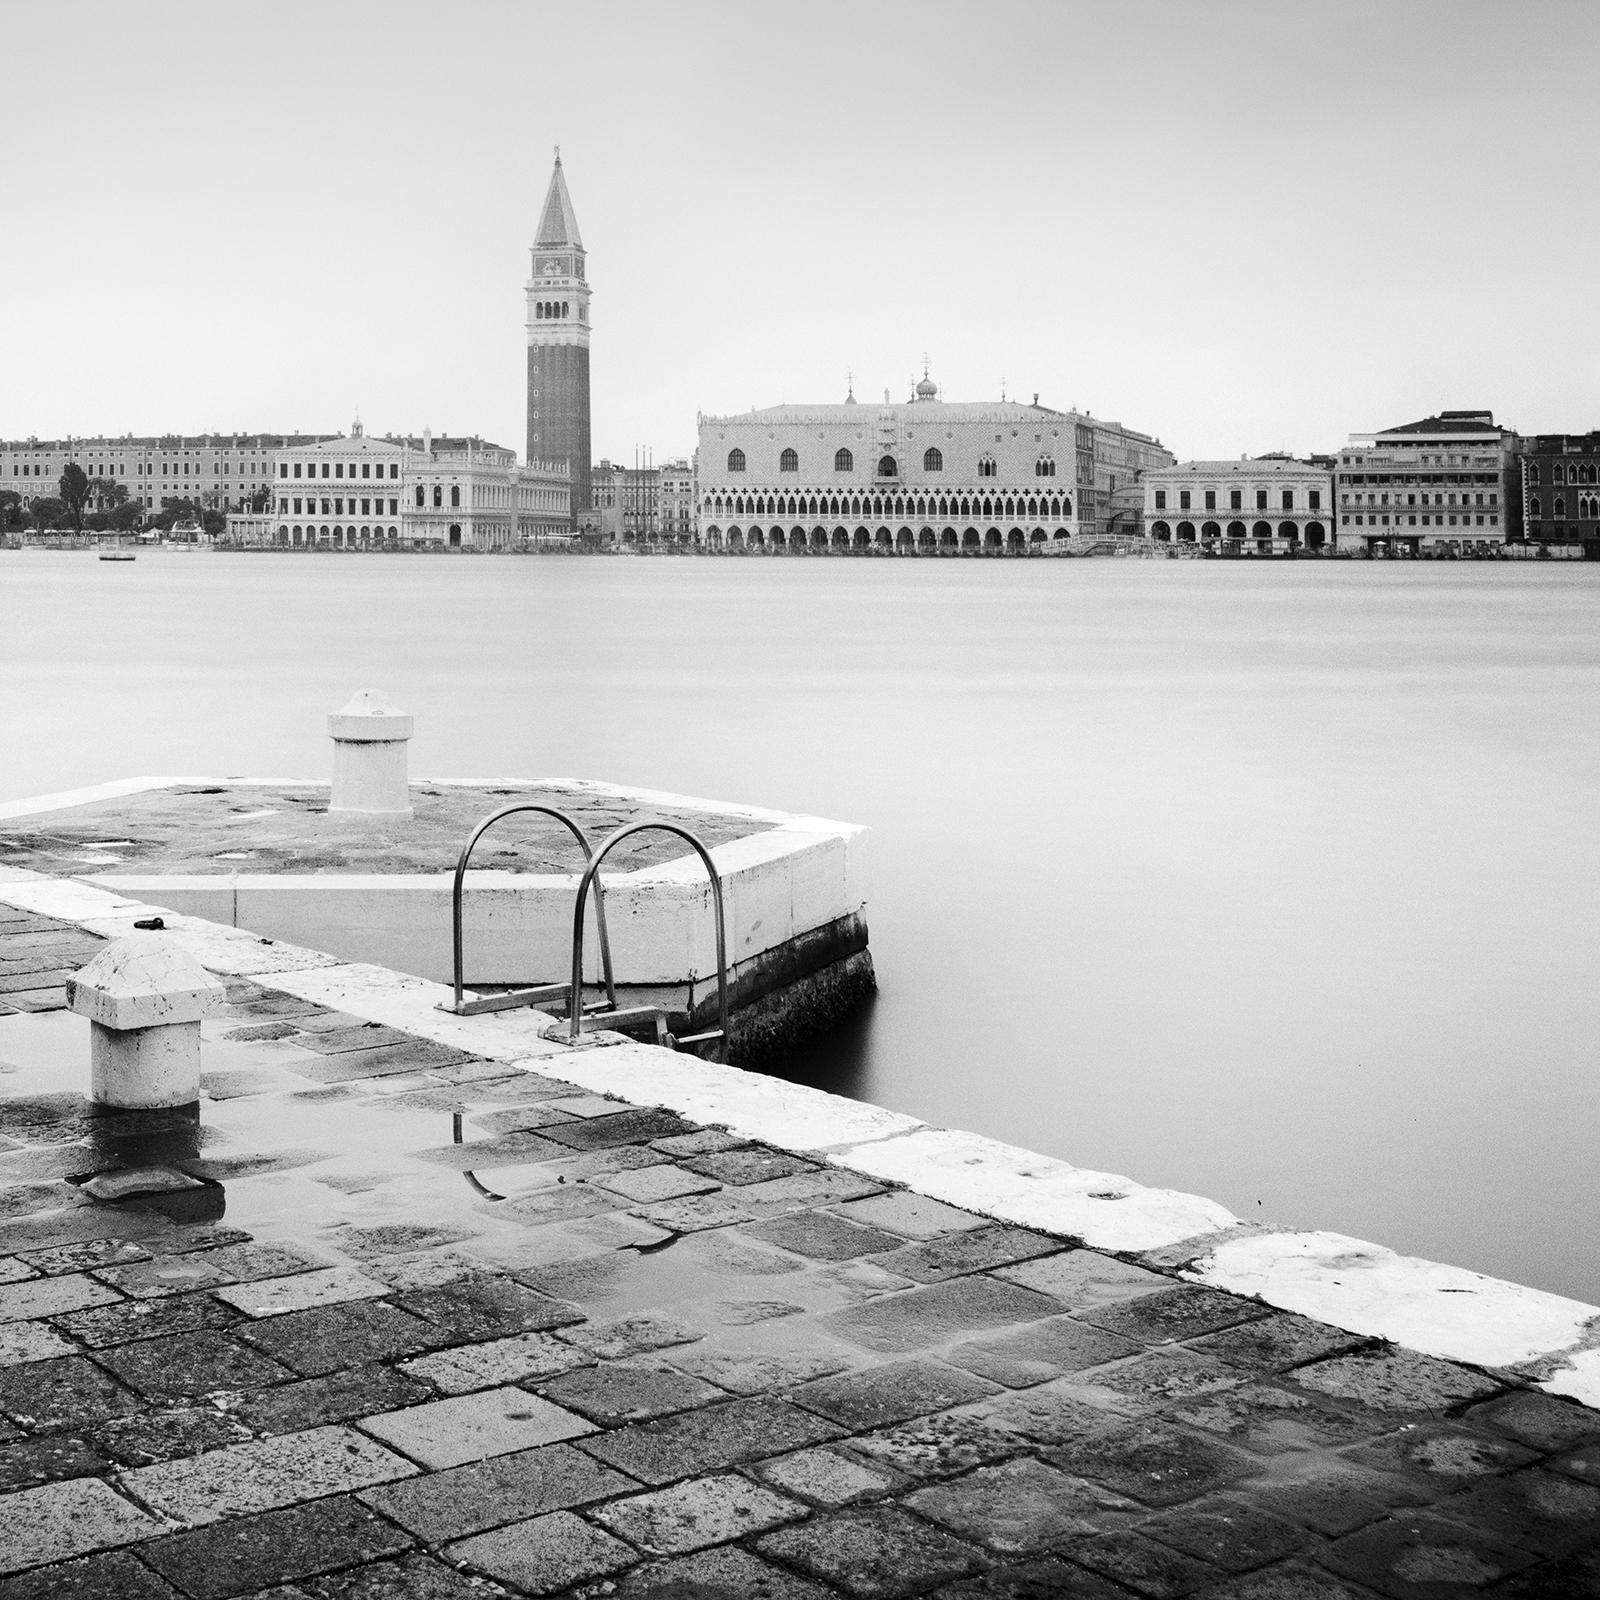 Black and white fine art long exposure waterscape - cityscape photography. Archival pigment ink print as part of a limited edition of 9. All Gerald Berghammer prints are made to order in limited editions on Hahnemuehle Photo Rag Baryta. Each print